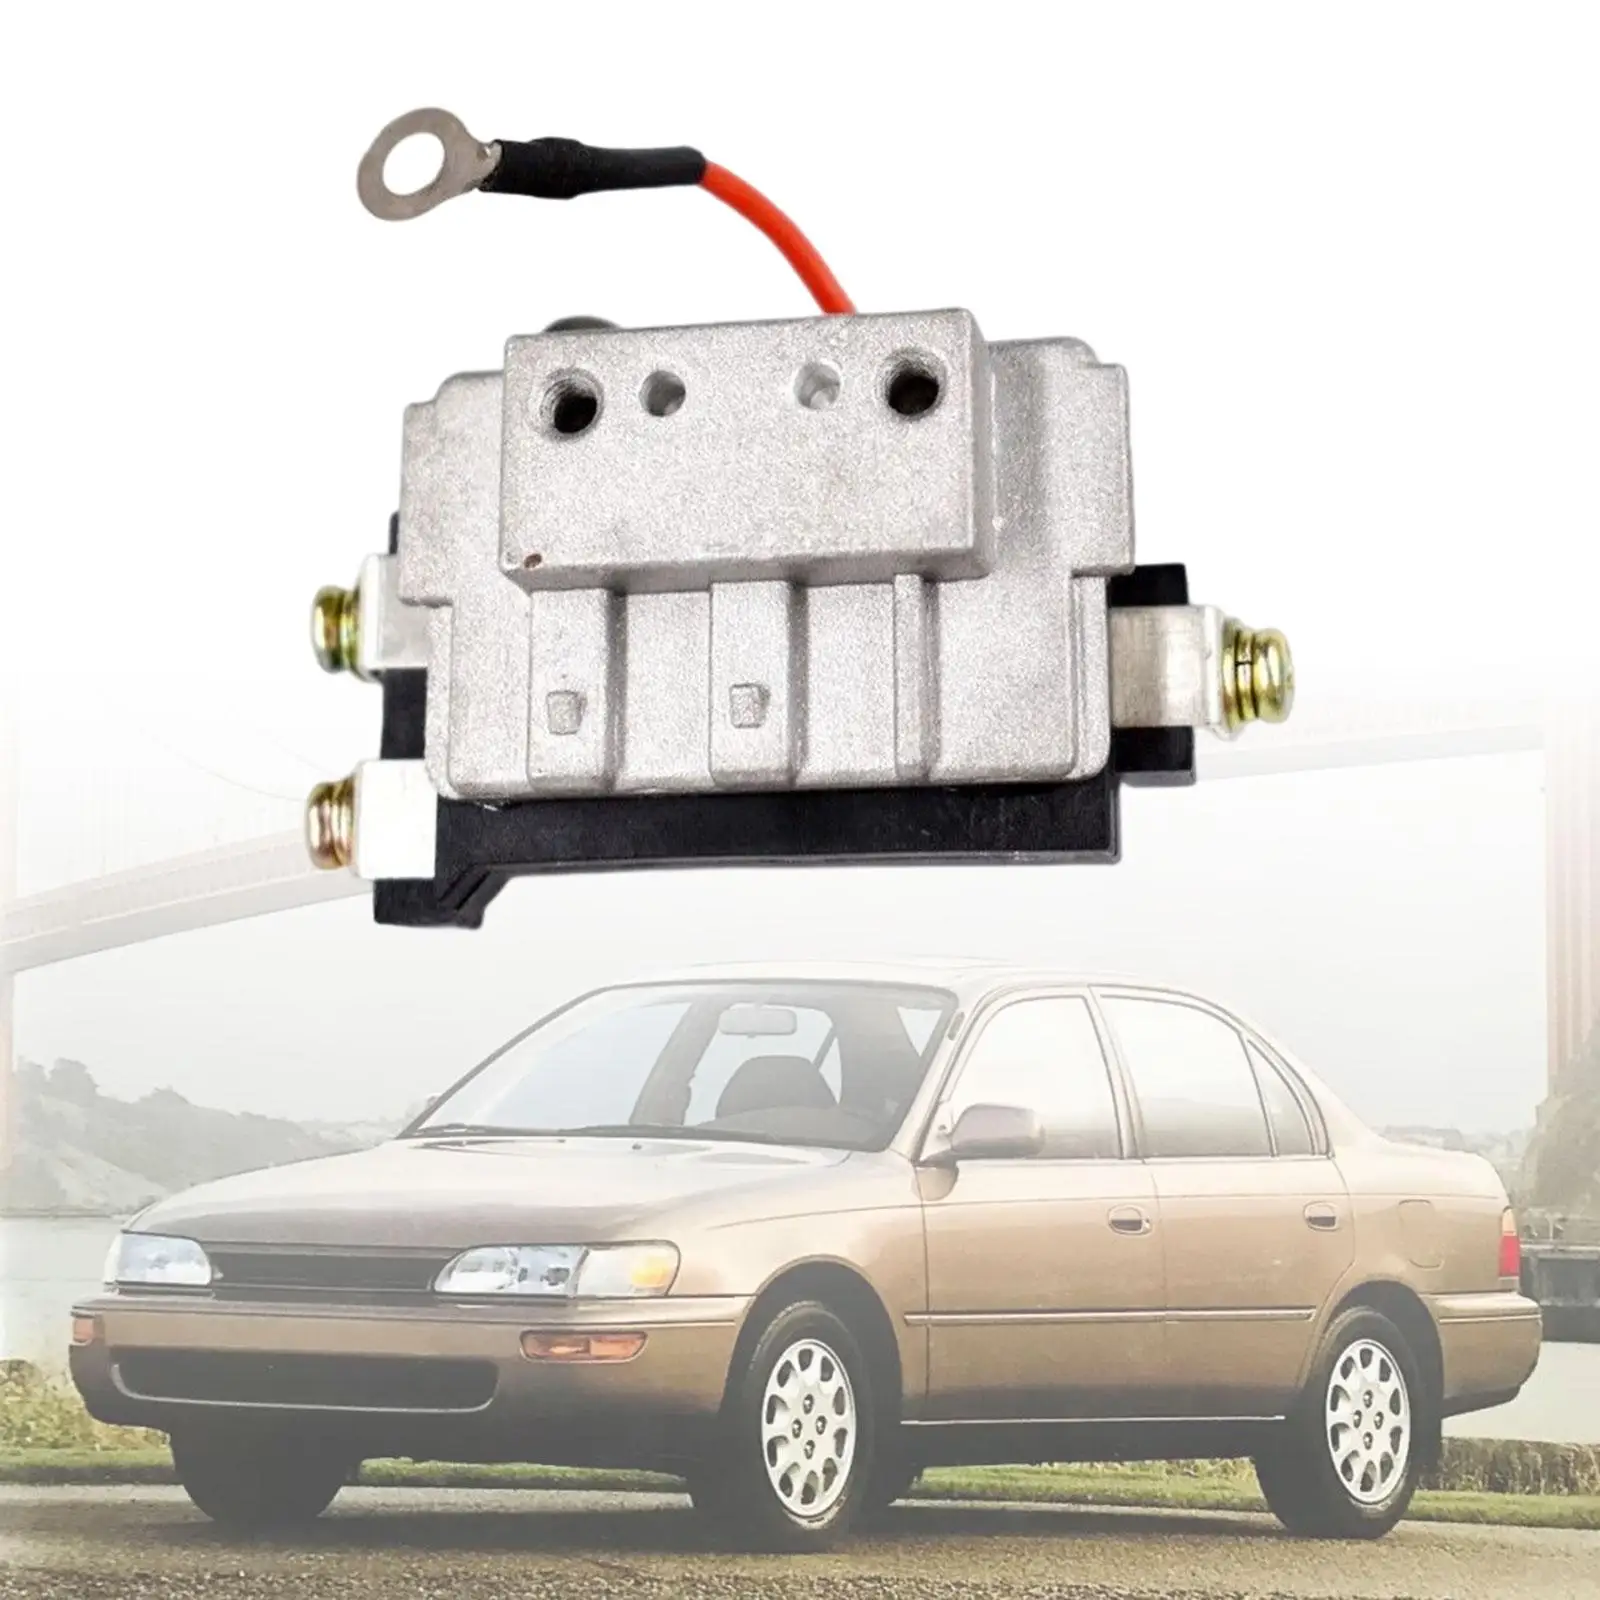 Ignition Control Module Replacement Accessories for Toyota Corolla